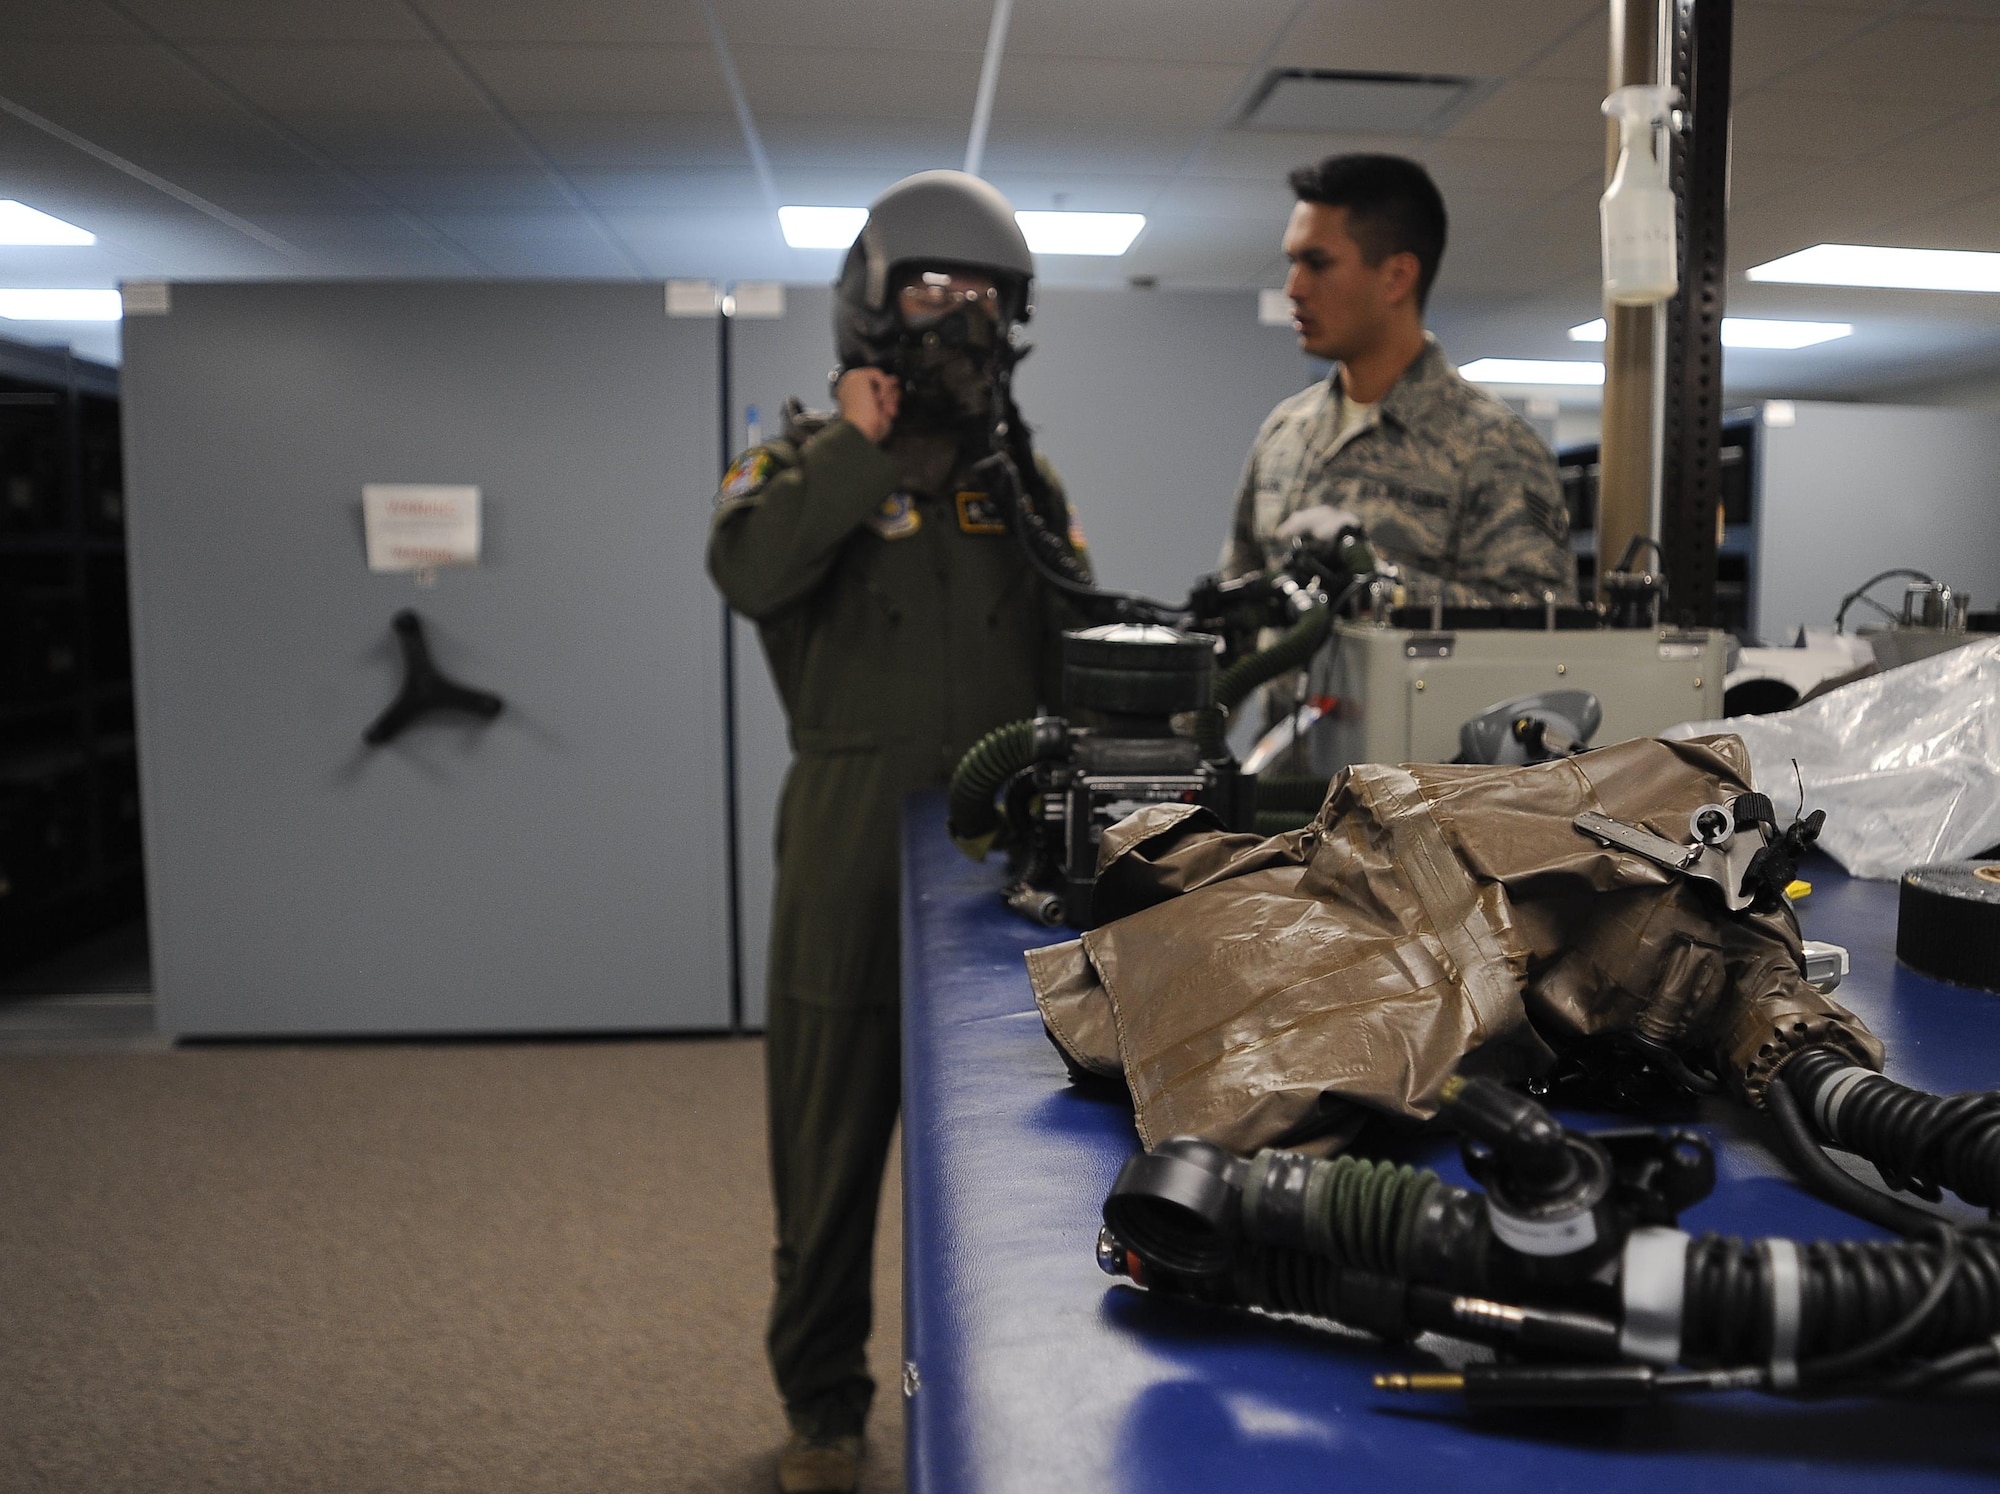 Staff Sgt. Matthew Walters, an aircrew flight equipment technician with the 6th Operations Support Squadron, fits an aircrew member for a helmet at MacDill Air Force Base, Fla., Nov. 2, 2016.  Helmets must be tested to ensure proper fitting. (U.S. Air Force photo by Airman 1st Class Mariette Adams)